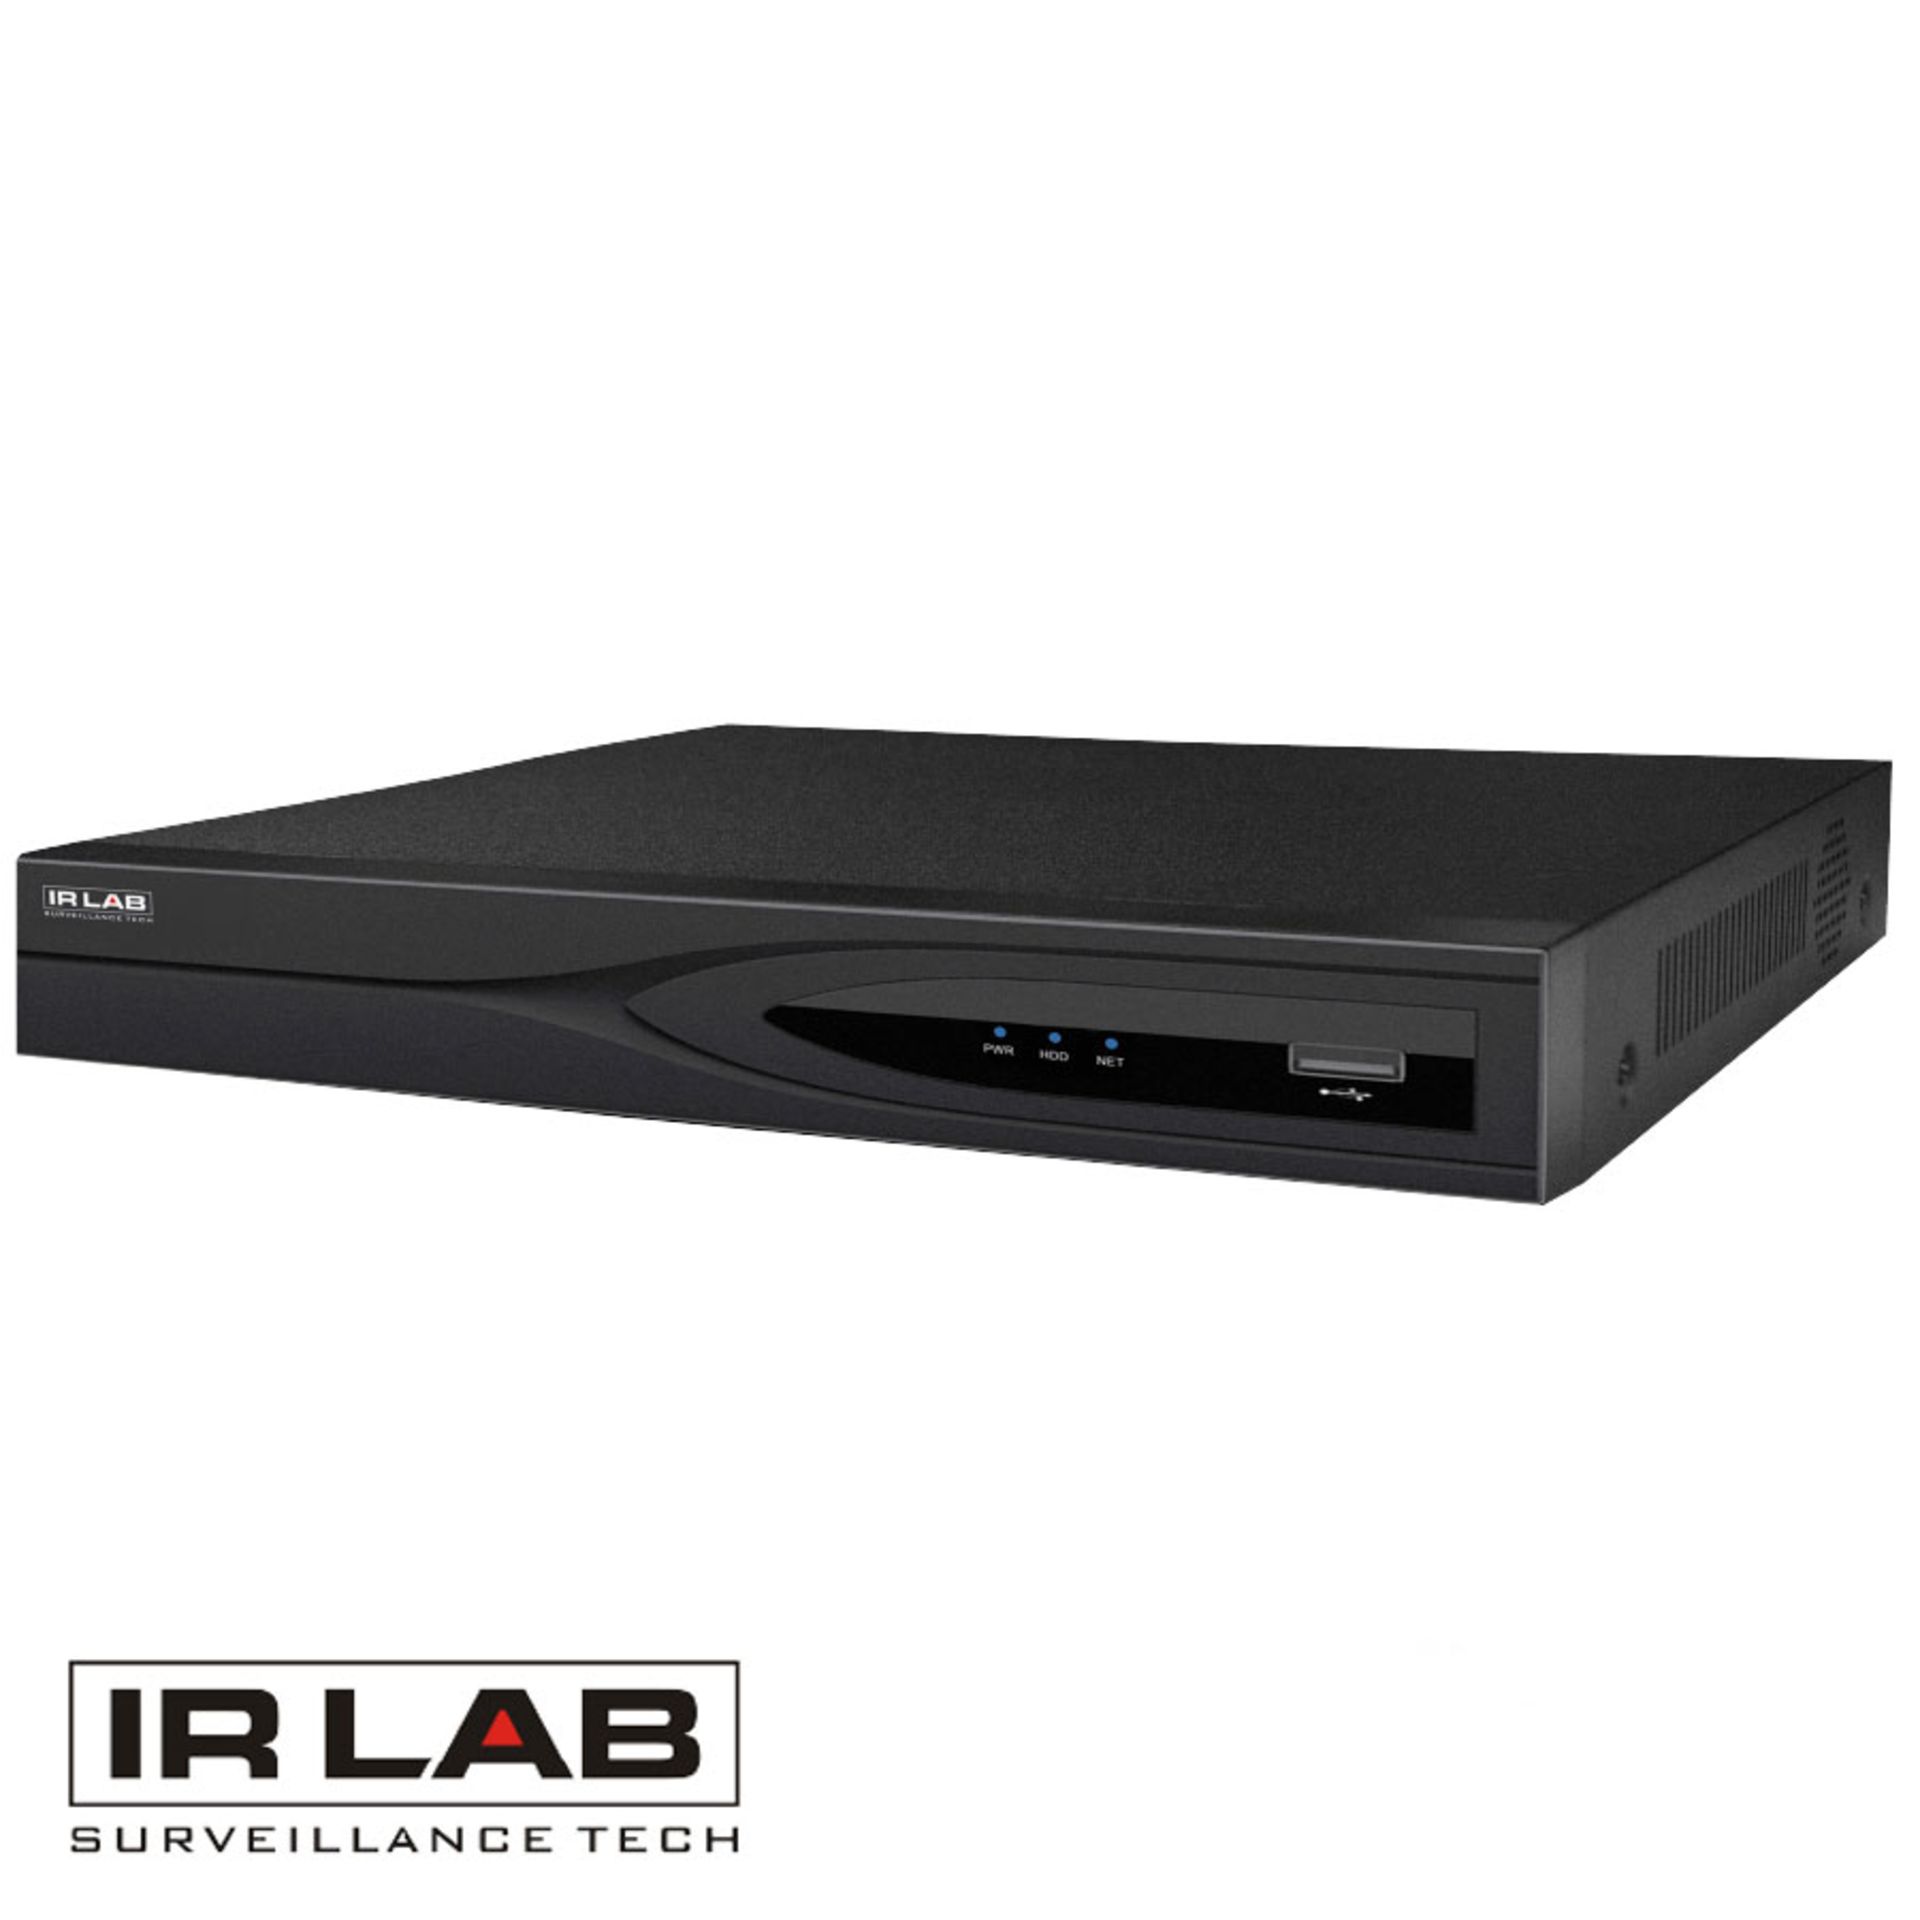 IRLAB H.265 16 Channel NVR with 1TB HDD and 4x IRLAB CIR-HDR26NEC IR Network Camera. RRP Over £359.